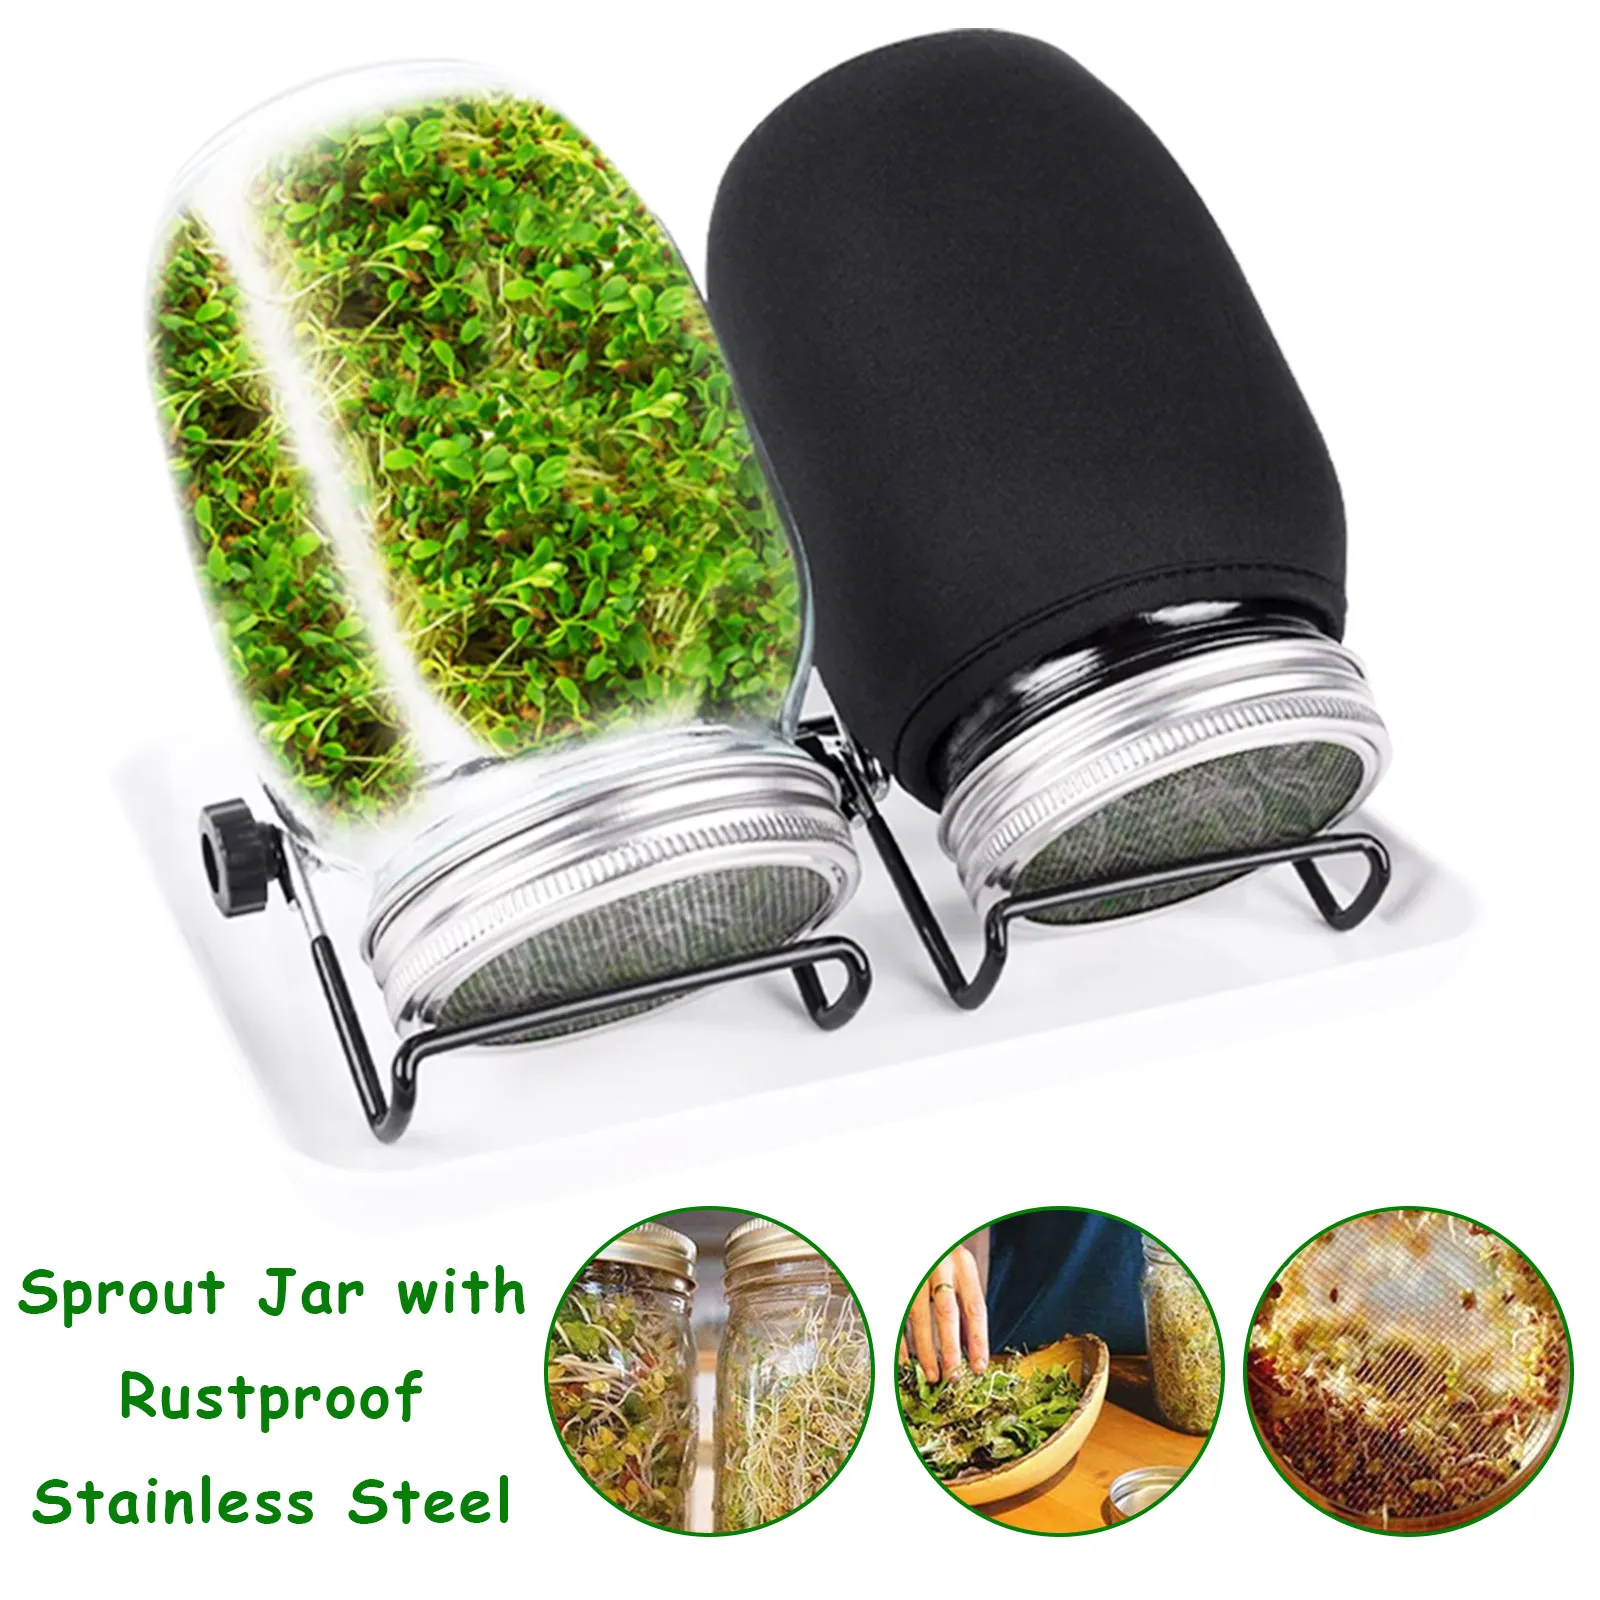 

Seed Sprouting Jar Kit with 2 Wide Mouth Mason Jars Durable Bean Sprouts Growing Kit with Stainless Steel Screen Sprout Lids